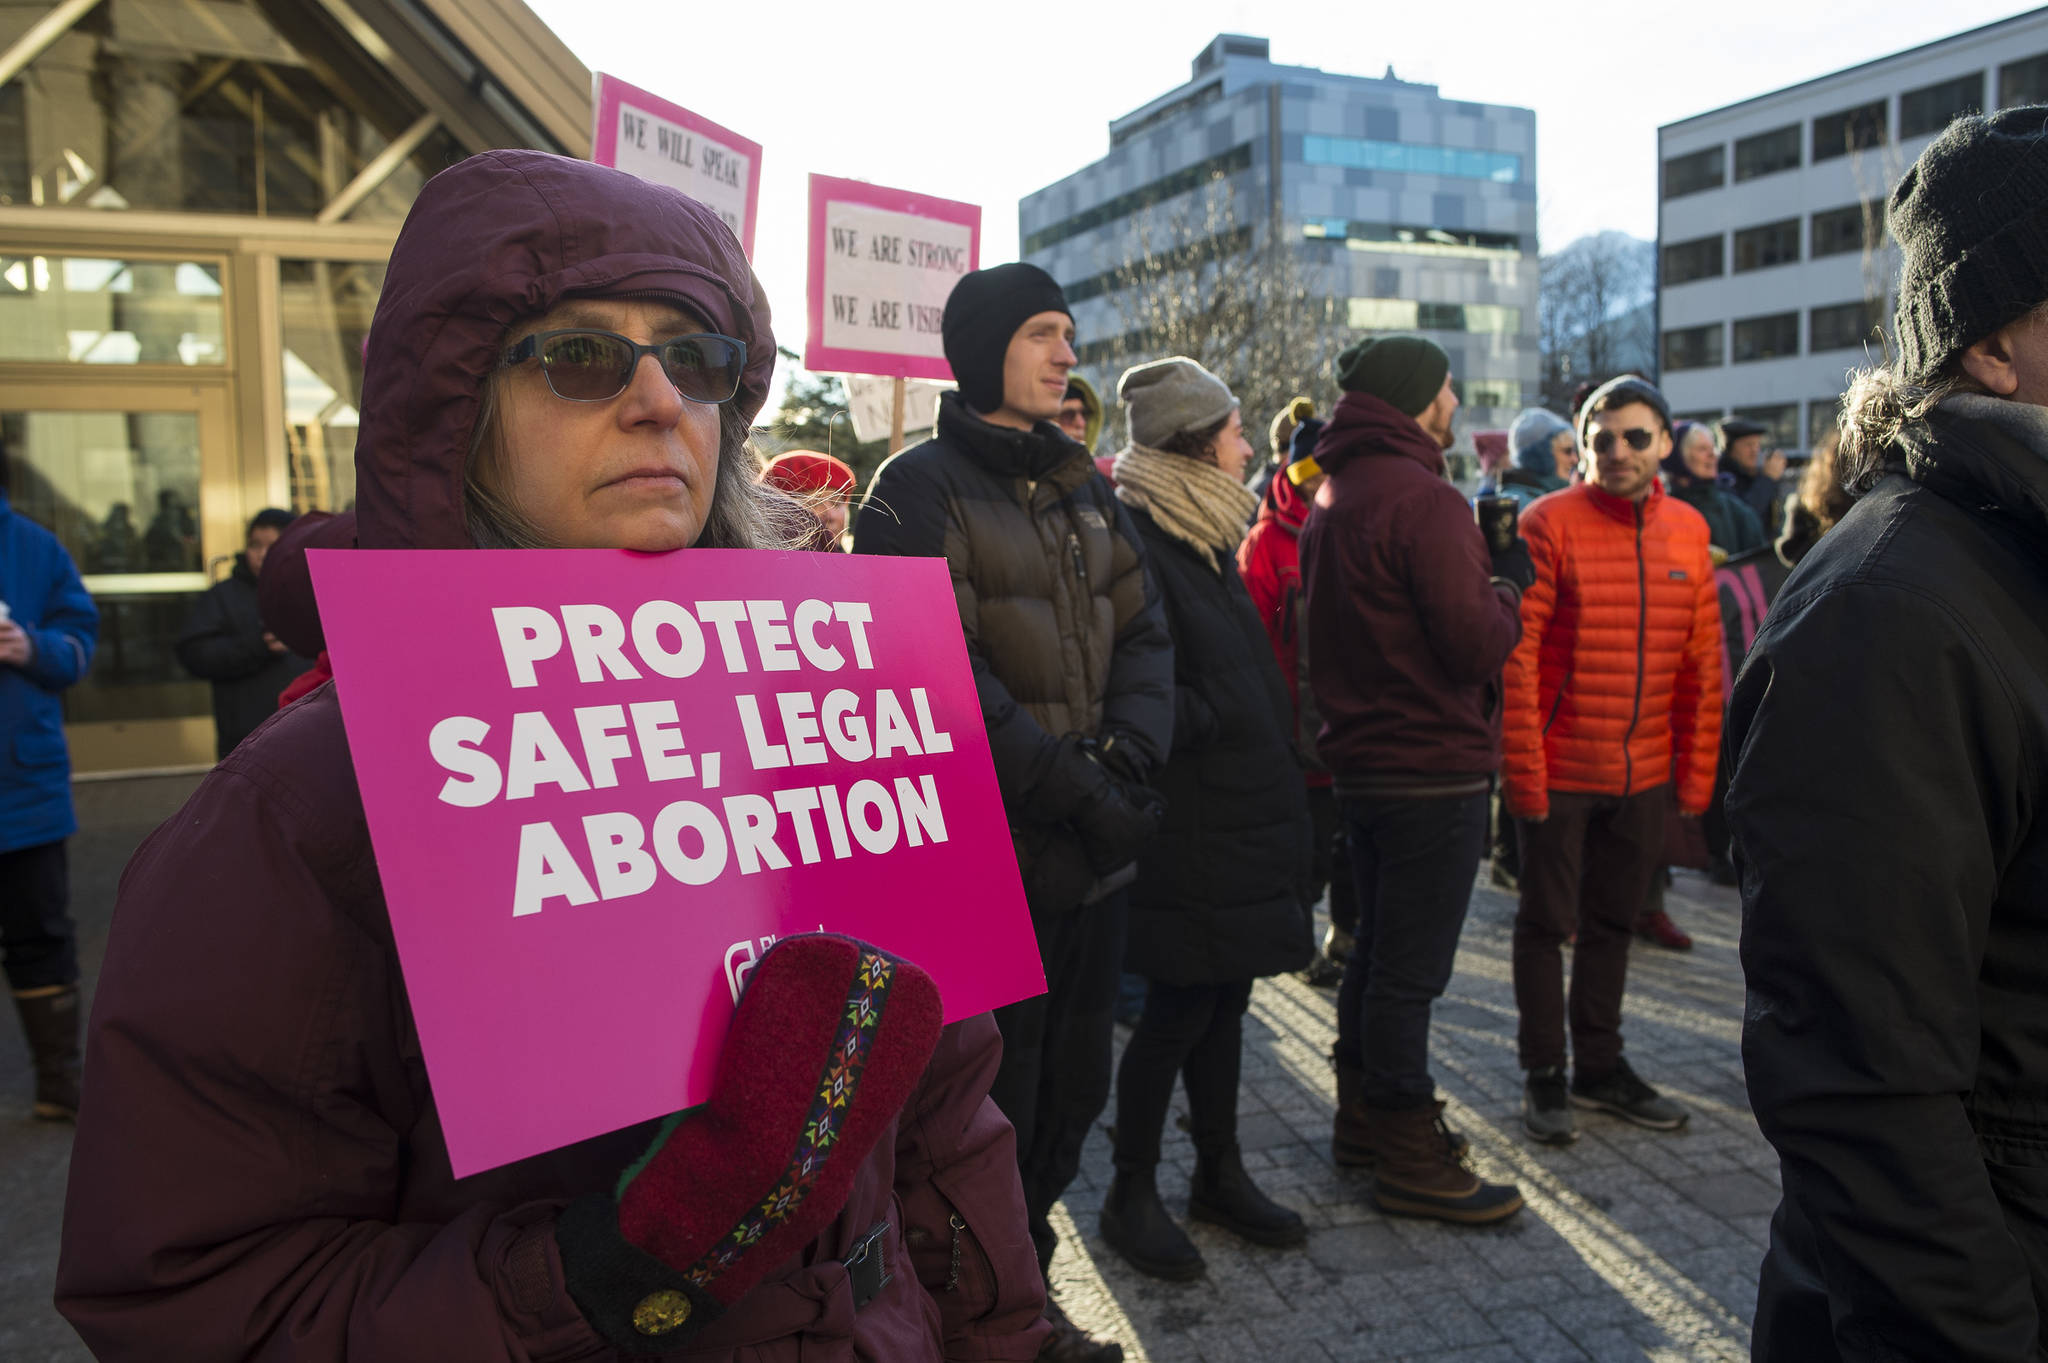 Rally to push back at attempts near and far to ban abortion